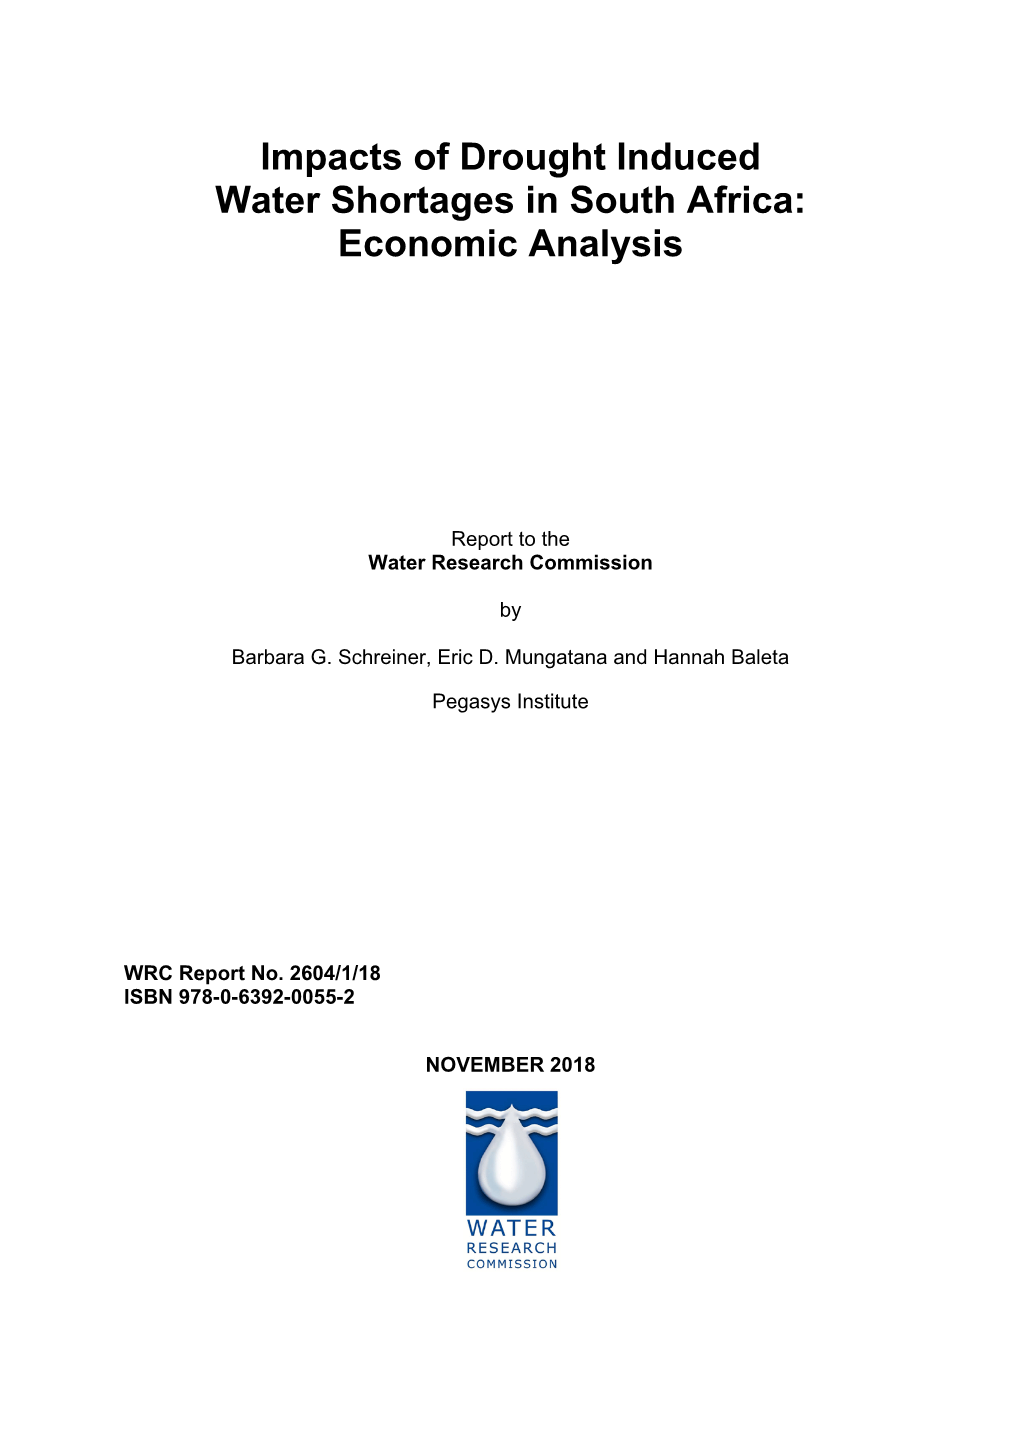 Impacts of Drought Induced Water Shortages in South Africa: Economic Analysis